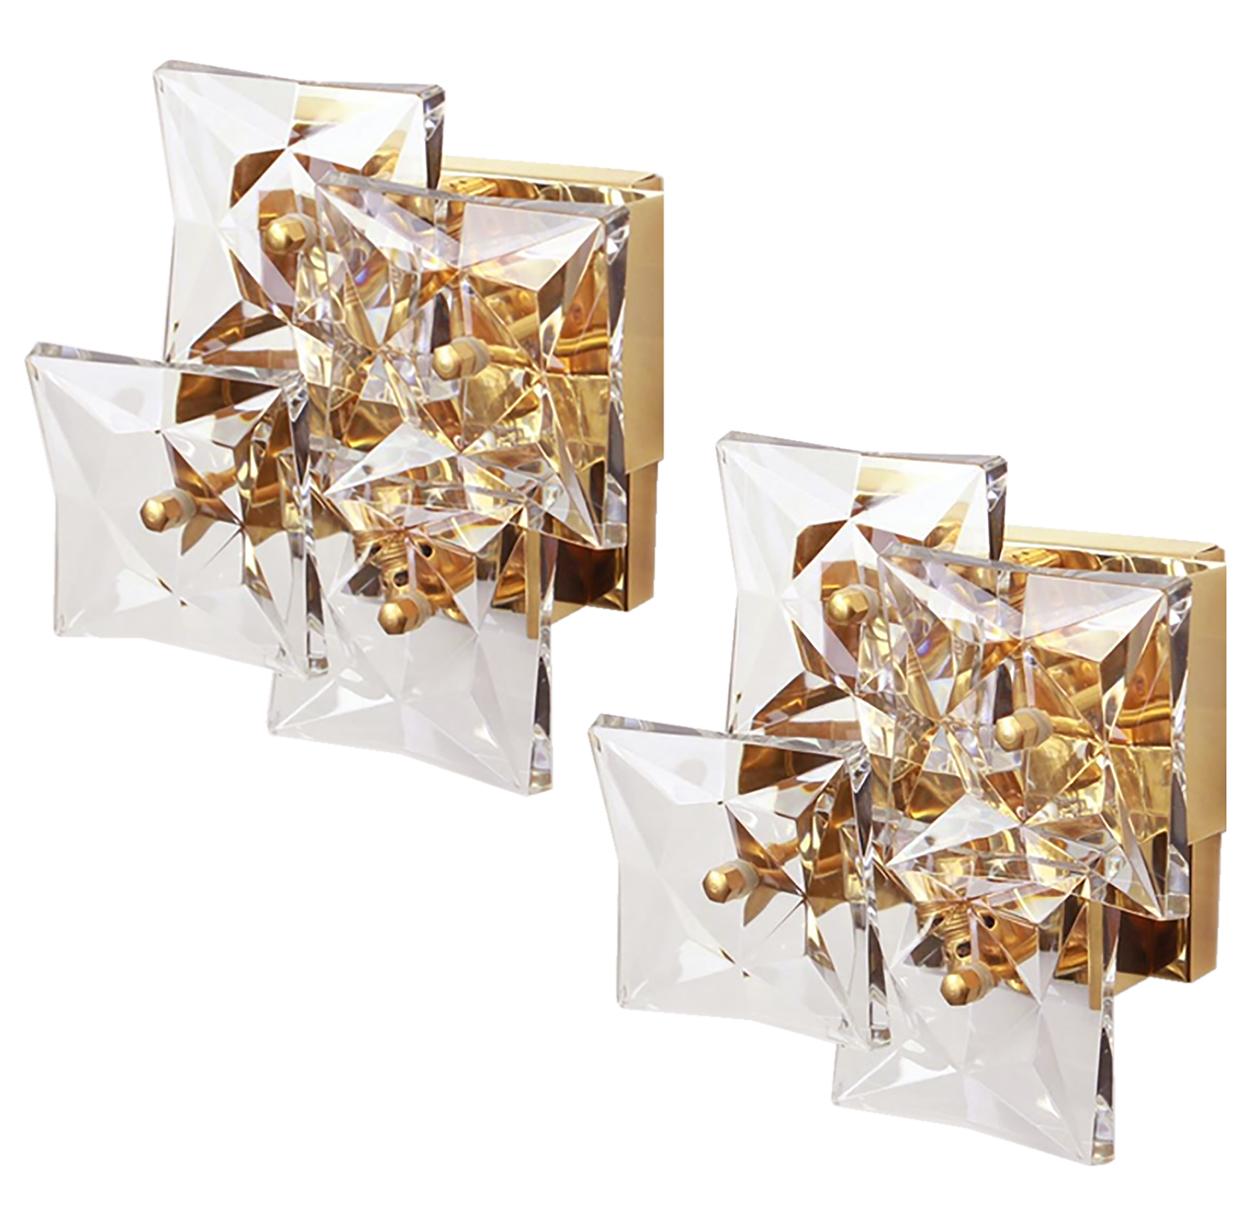 One of the Ten Square Crystal, Gold-Plated, Sconces by Kinkeldey, Germany, 1970s For Sale 2